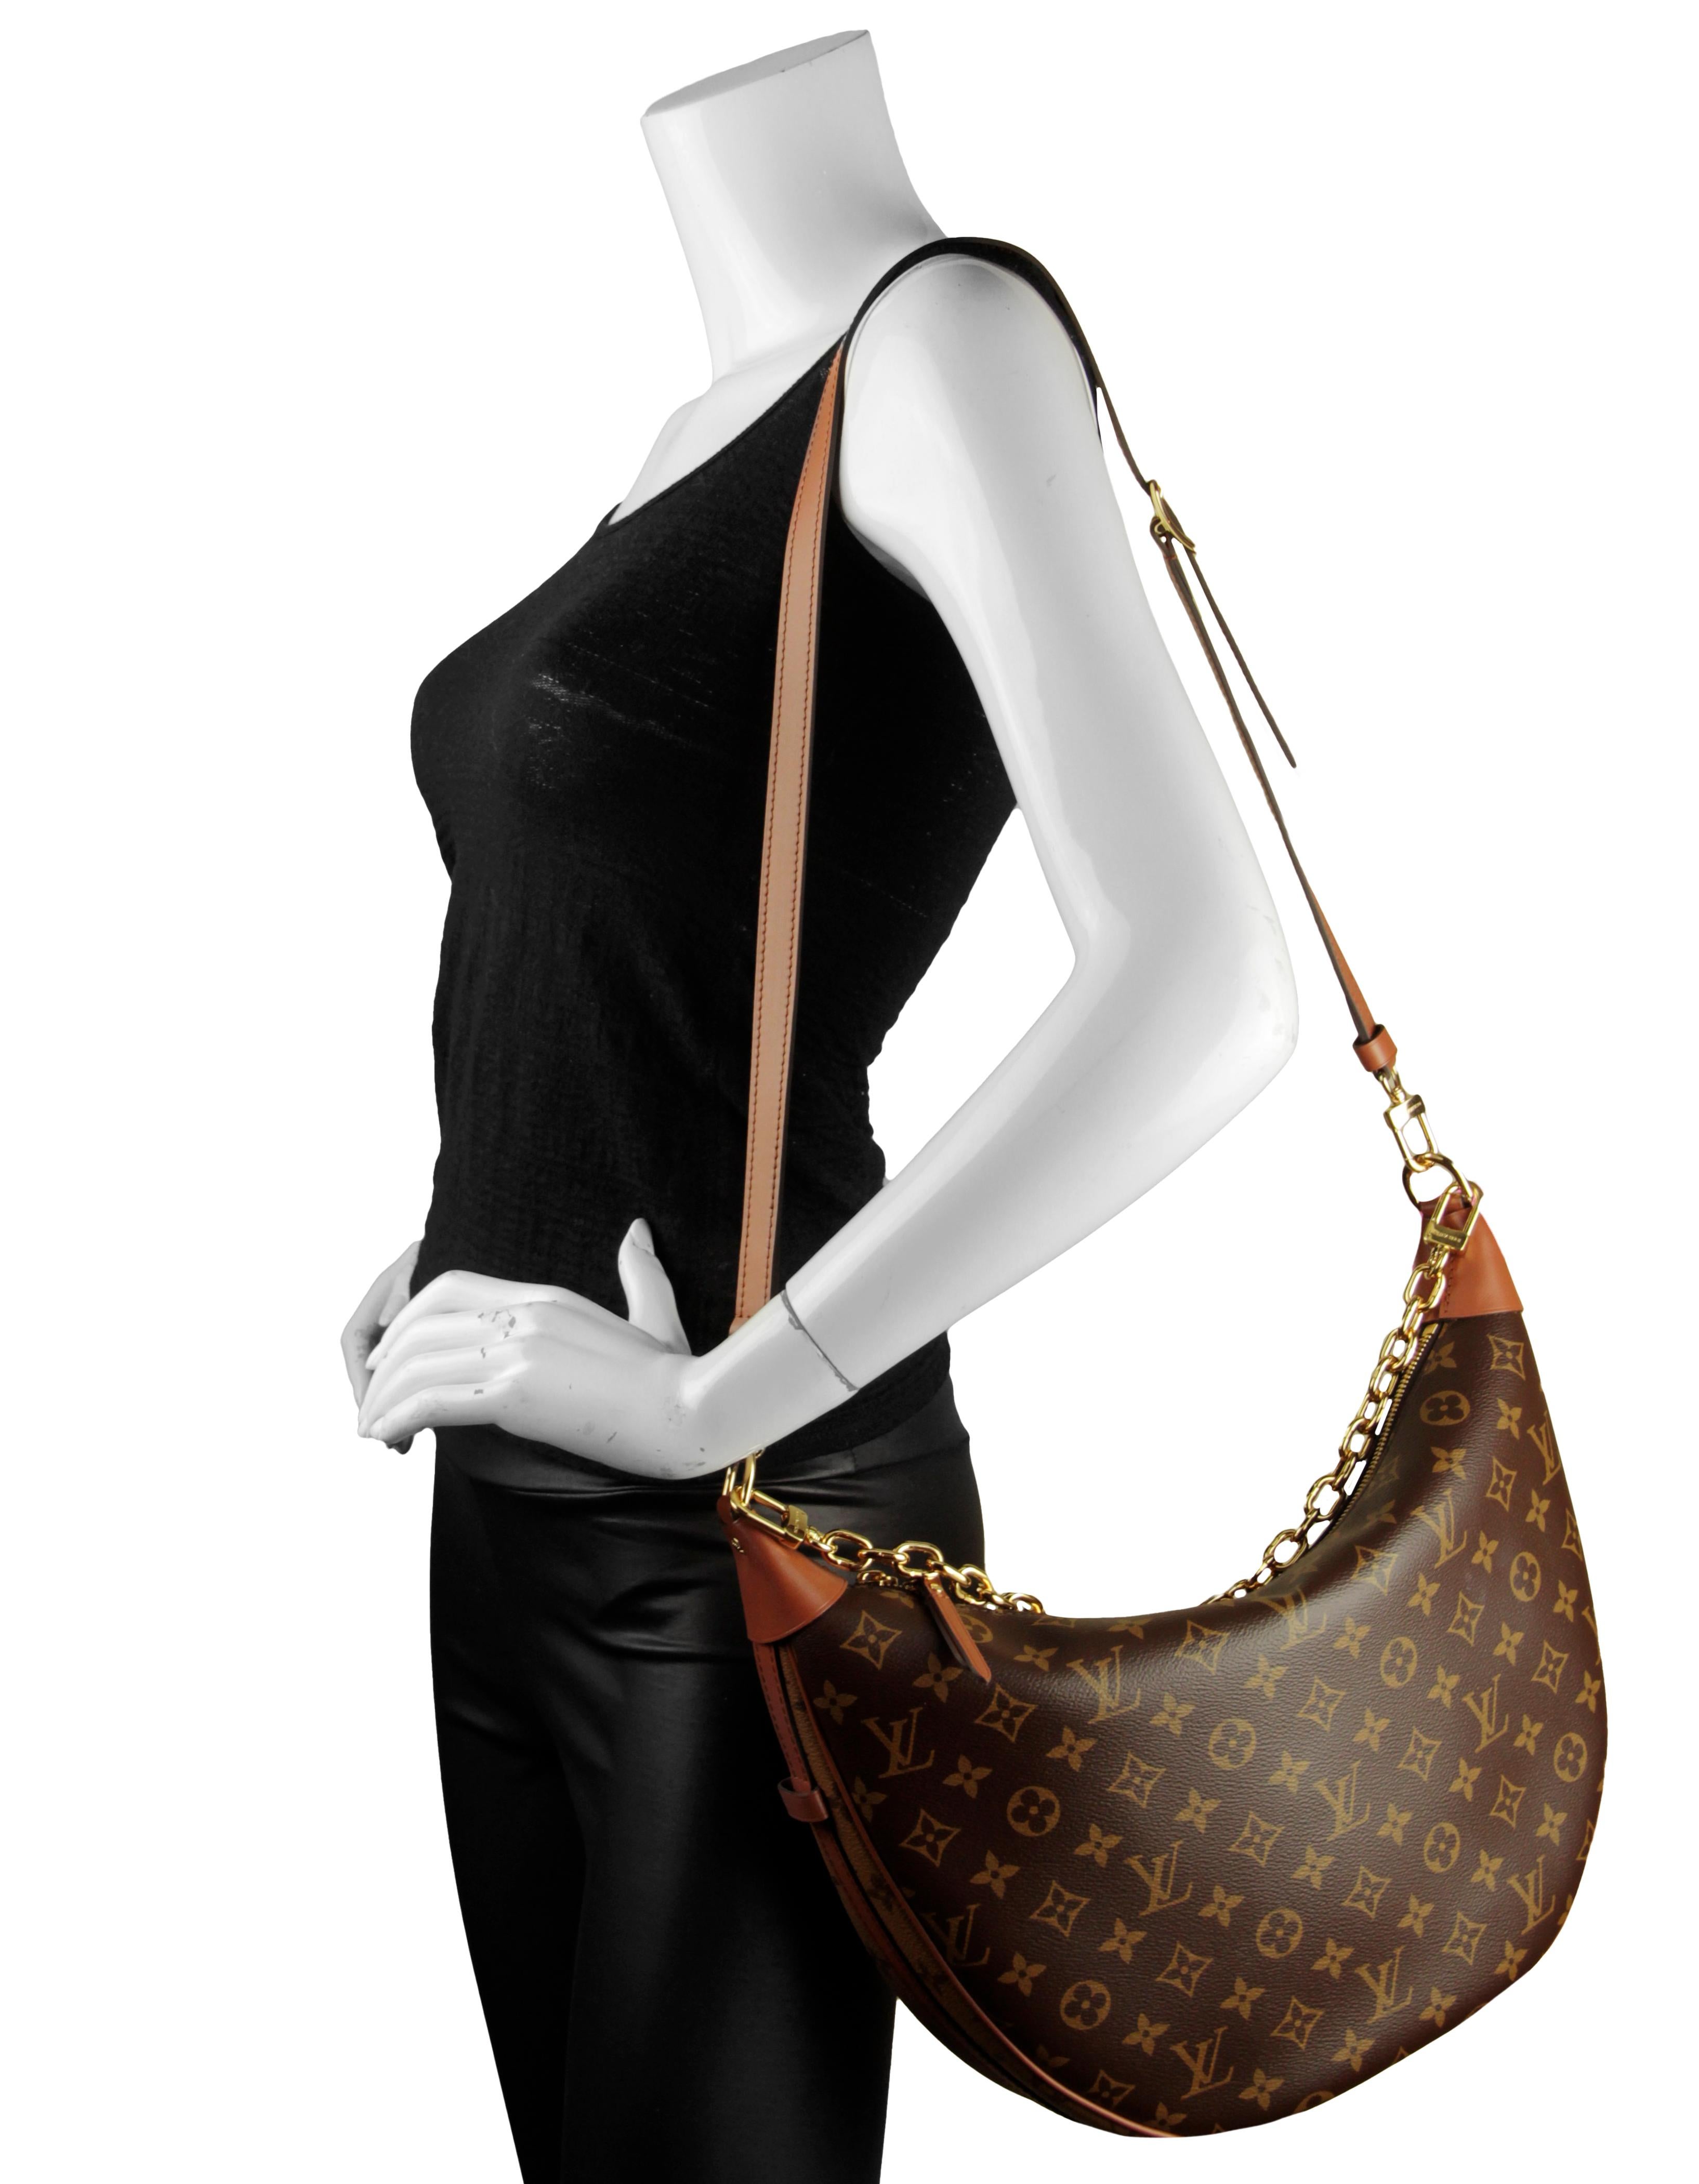 Louis Vuitton Reverse Monogram Loop Hobo Bag. Features removable chain strap and crossbody/shoulder strap.

Made In: France
Color: Brown and tan
Hardware: Goldtone hardware
Materials: Coated canvas with cowhide leather trim
Lining: Brown